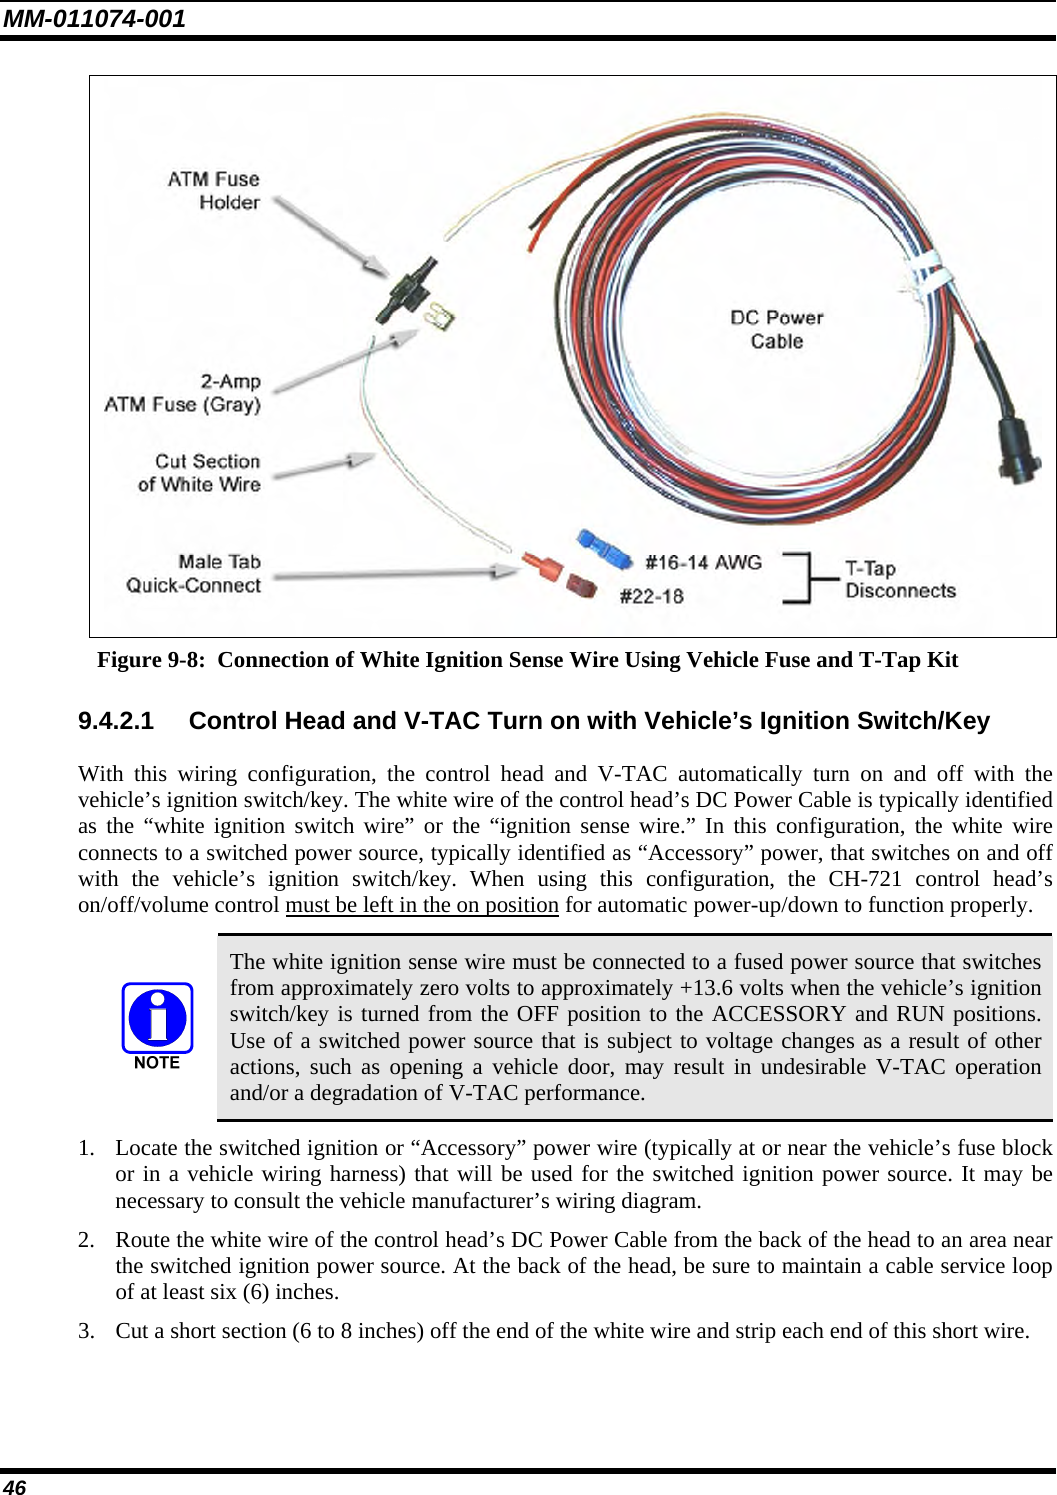 MM-011074-001 46  Figure 9-8:  Connection of White Ignition Sense Wire Using Vehicle Fuse and T-Tap Kit 9.4.2.1  Control Head and V-TAC Turn on with Vehicle’s Ignition Switch/Key With this wiring configuration, the control head and V-TAC automatically turn on and off with the vehicle’s ignition switch/key. The white wire of the control head’s DC Power Cable is typically identified as the “white ignition switch wire” or the “ignition sense wire.” In this configuration, the white wire connects to a switched power source, typically identified as “Accessory” power, that switches on and off with the vehicle’s ignition switch/key. When using this configuration, the CH-721 control head’s on/off/volume control must be left in the on position for automatic power-up/down to function properly.   The white ignition sense wire must be connected to a fused power source that switches from approximately zero volts to approximately +13.6 volts when the vehicle’s ignition switch/key is turned from the OFF position to the ACCESSORY and RUN positions. Use of a switched power source that is subject to voltage changes as a result of other actions, such as opening a vehicle door, may result in undesirable V-TAC operation and/or a degradation of V-TAC performance. 1. Locate the switched ignition or “Accessory” power wire (typically at or near the vehicle’s fuse block or in a vehicle wiring harness) that will be used for the switched ignition power source. It may be necessary to consult the vehicle manufacturer’s wiring diagram. 2. Route the white wire of the control head’s DC Power Cable from the back of the head to an area near the switched ignition power source. At the back of the head, be sure to maintain a cable service loop of at least six (6) inches. 3. Cut a short section (6 to 8 inches) off the end of the white wire and strip each end of this short wire. 